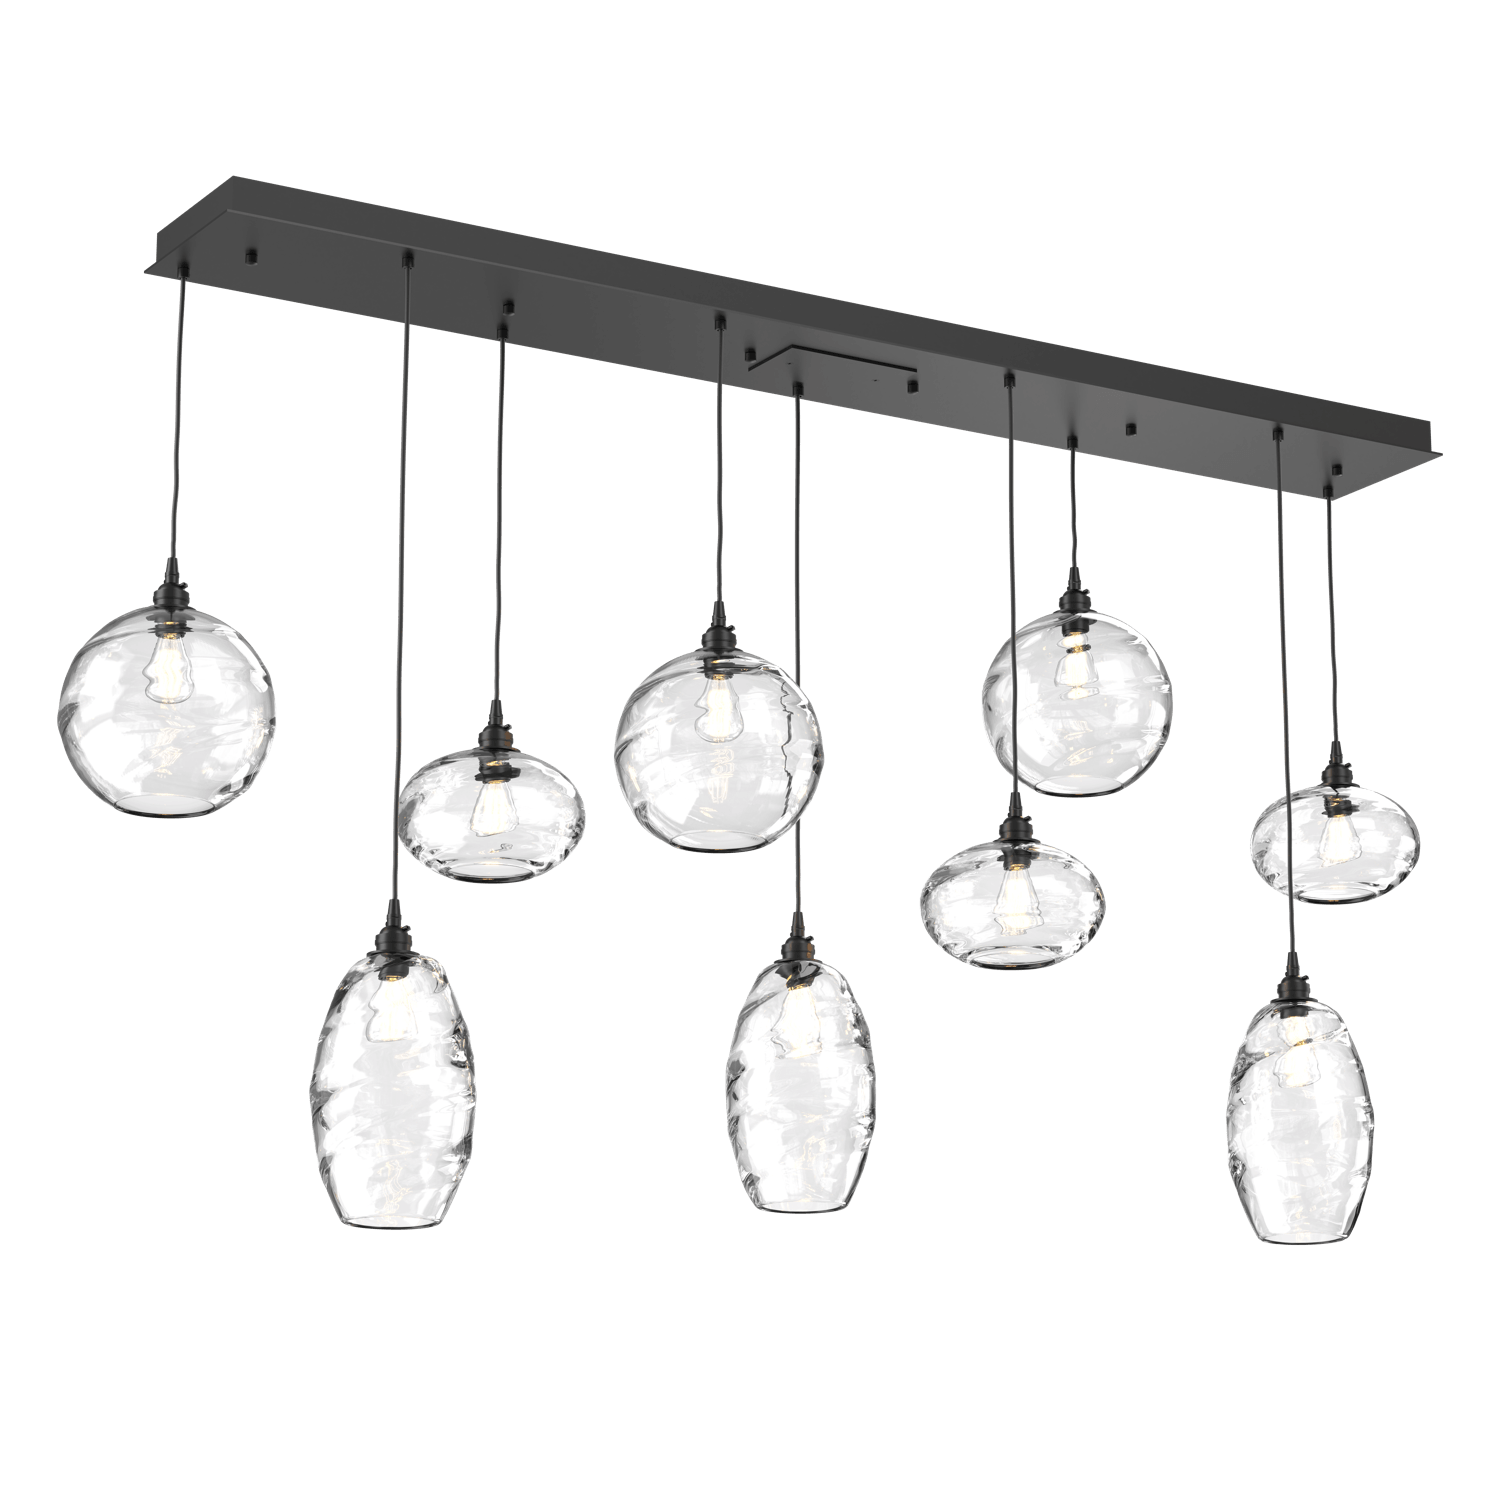 PLB0048-09-MB-OC-Hammerton-Studio-Optic-Blown-Glass-Misto-9-light-linear-pendant-chandelier-with-matte-black-finish-and-optic-clear-blown-glass-shades-and-incandescent-lamping